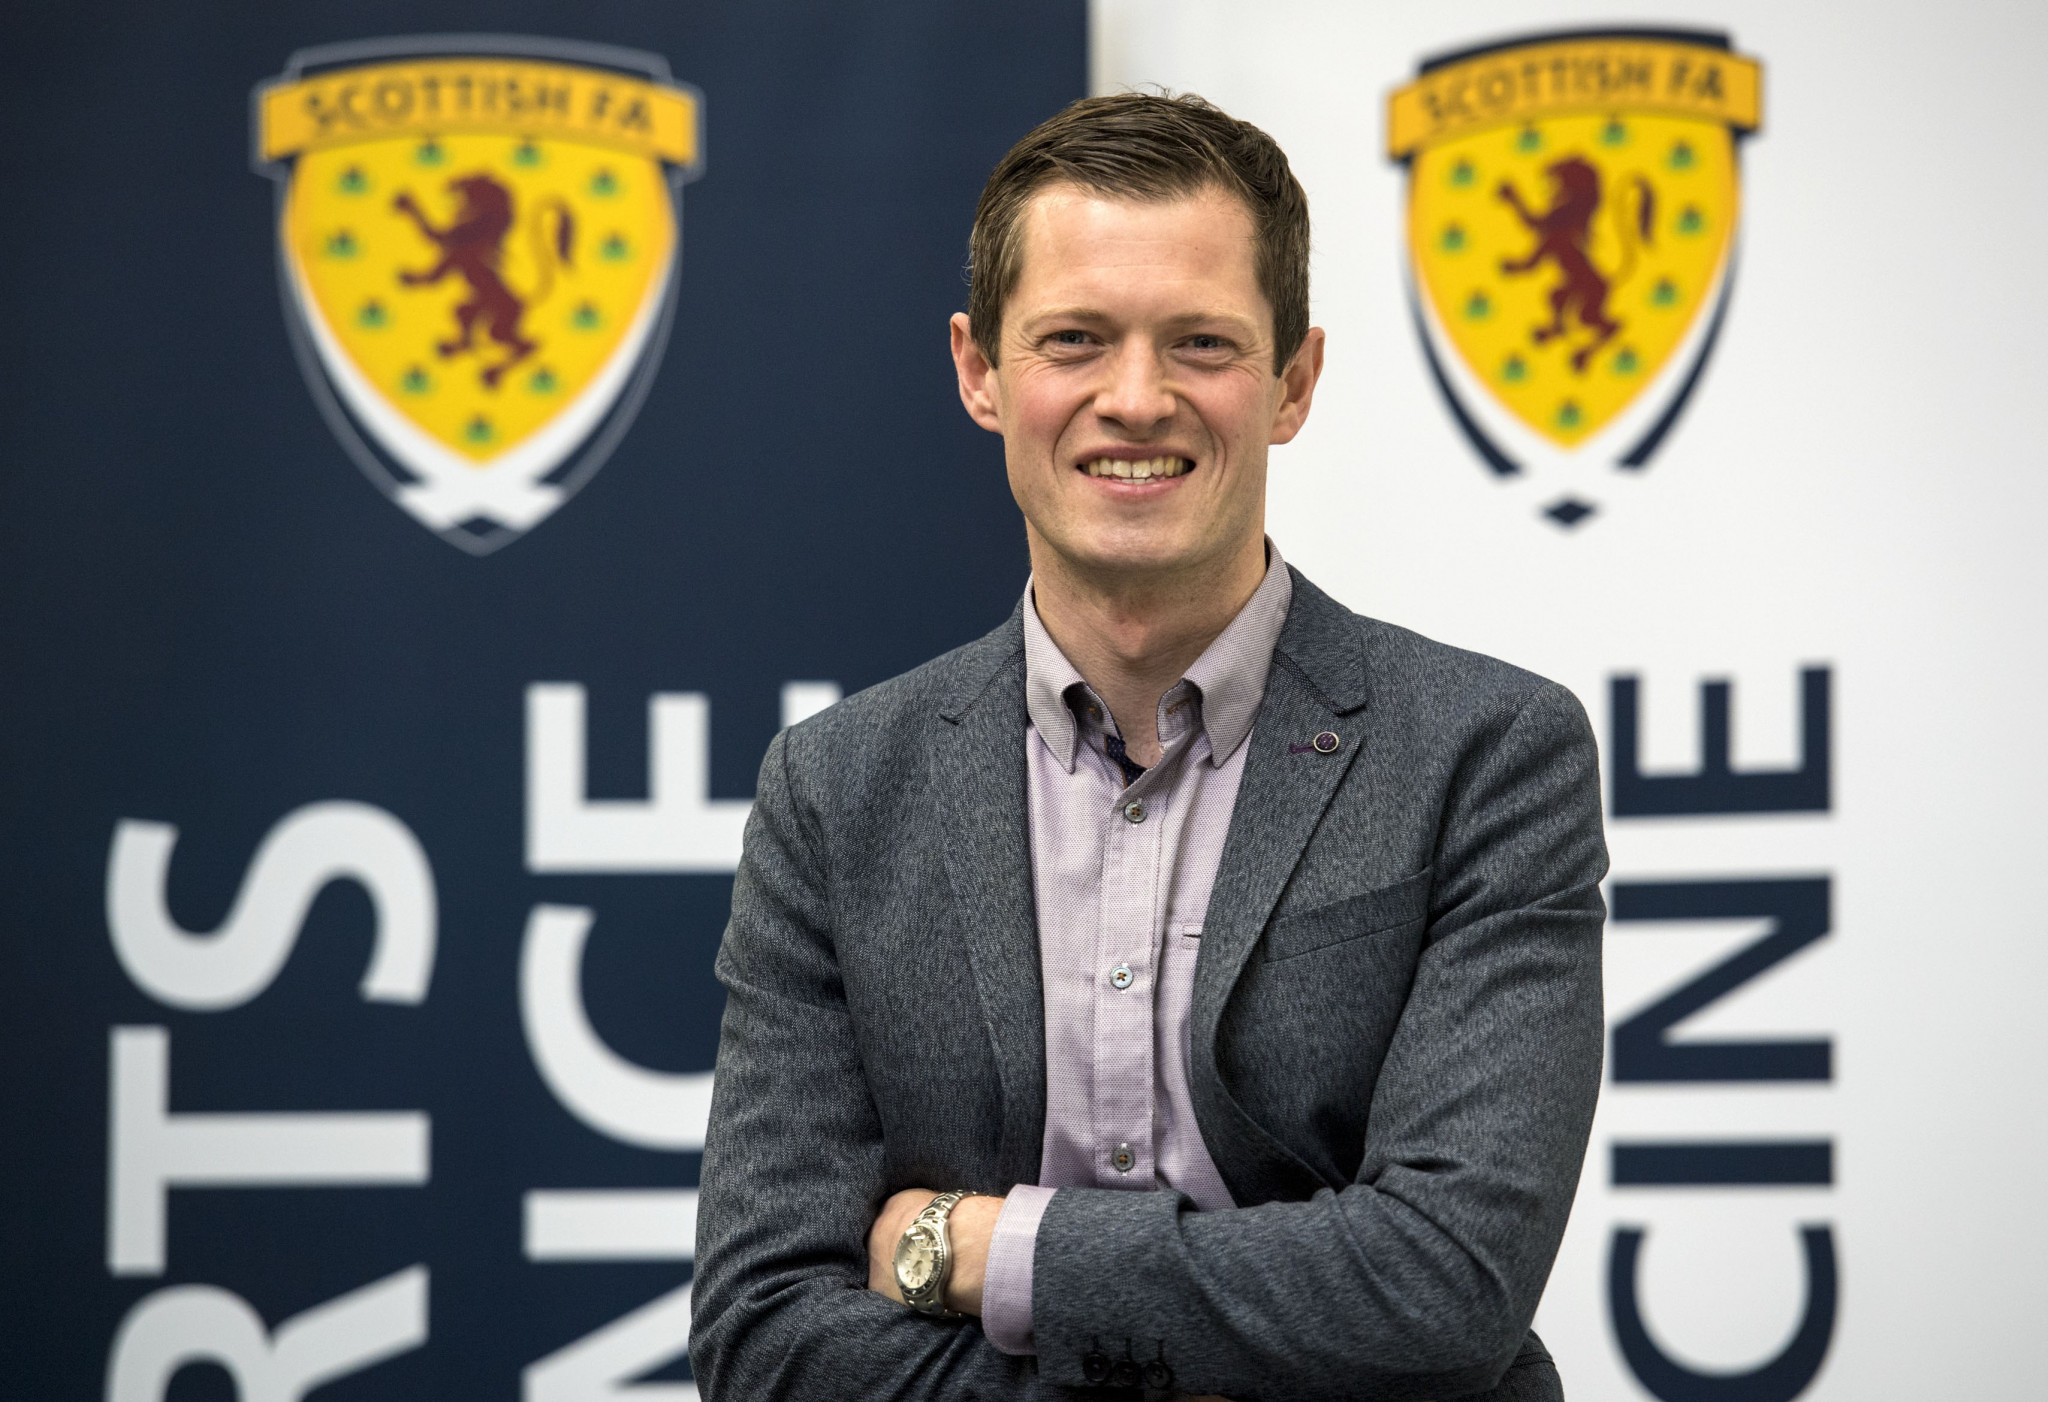 Graeme Jones is one of two new appointees as non-executive directors to the Scottish Squash Board ©Scottish Squash